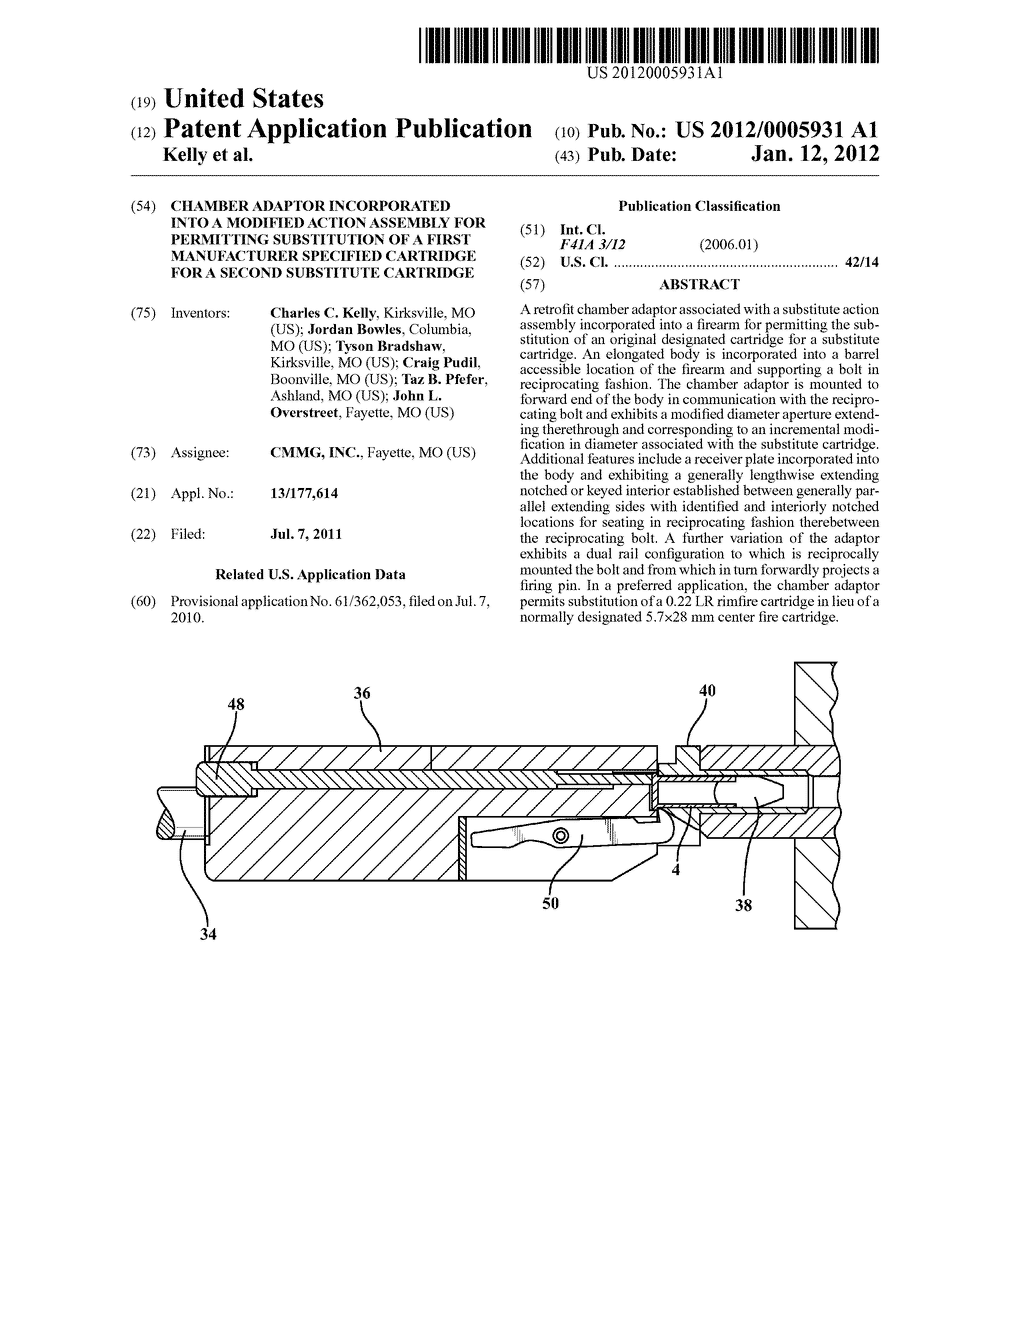 CHAMBER ADAPTOR INCORPORATED INTO A MODIFIED ACTION ASSEMBLY FOR     PERMITTING SUBSTITUTION OF A FIRST MANUFACTURER SPECIFIED CARTRIDGE FOR A     SECOND SUBSTITUTE CARTRIDGE - diagram, schematic, and image 01